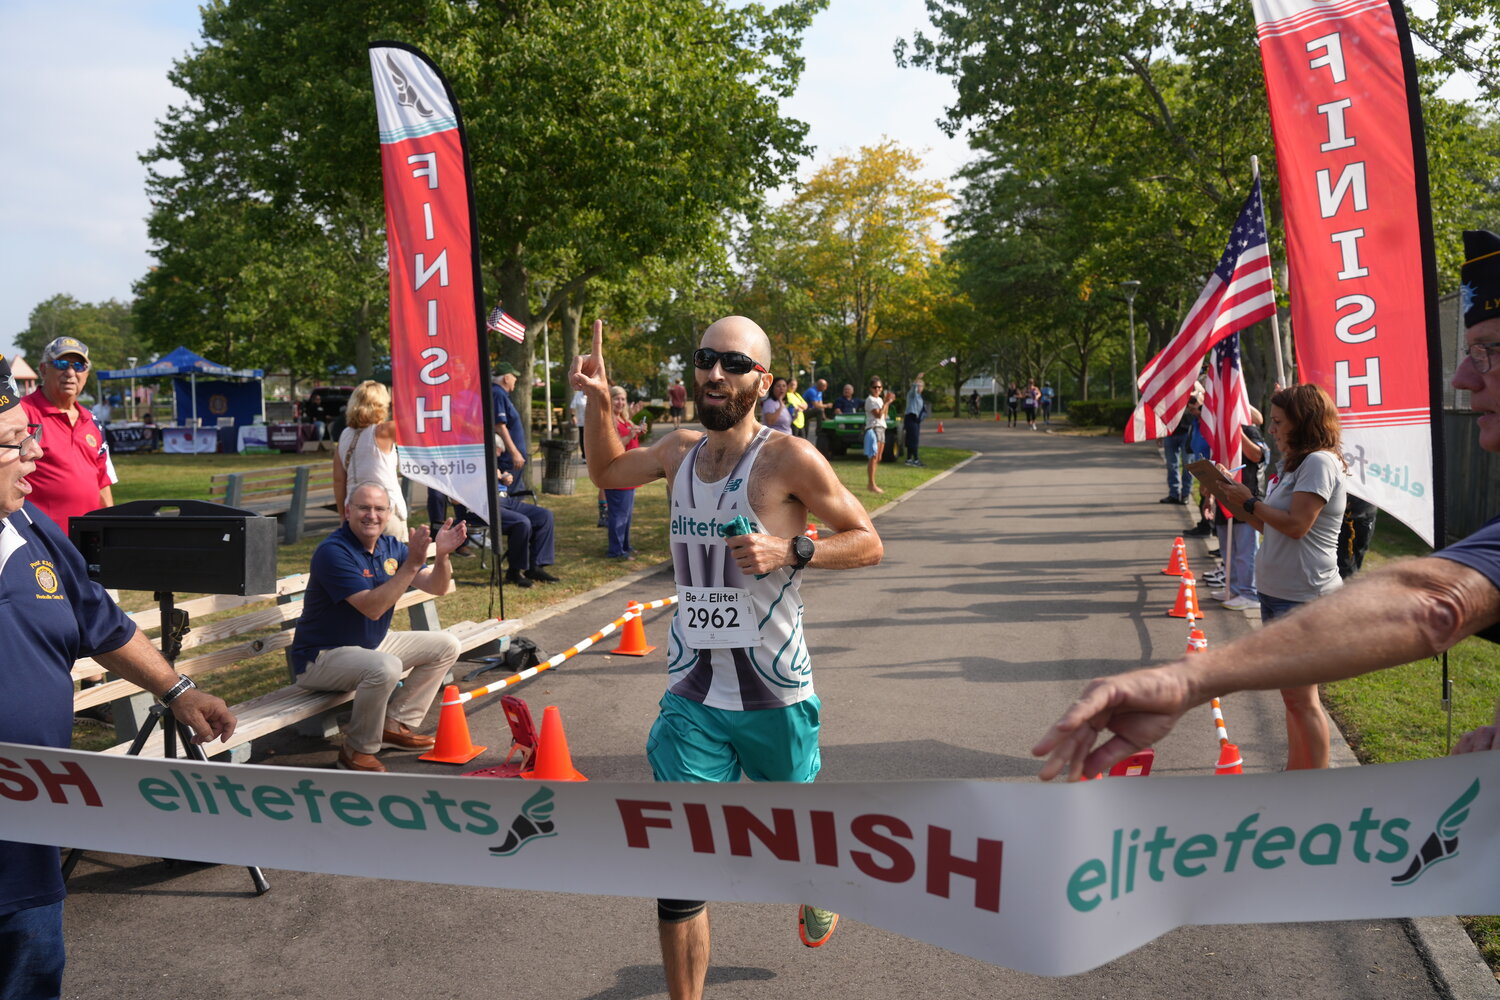 Keith Masso, from Glen Cove, finished first overall in the 5K.